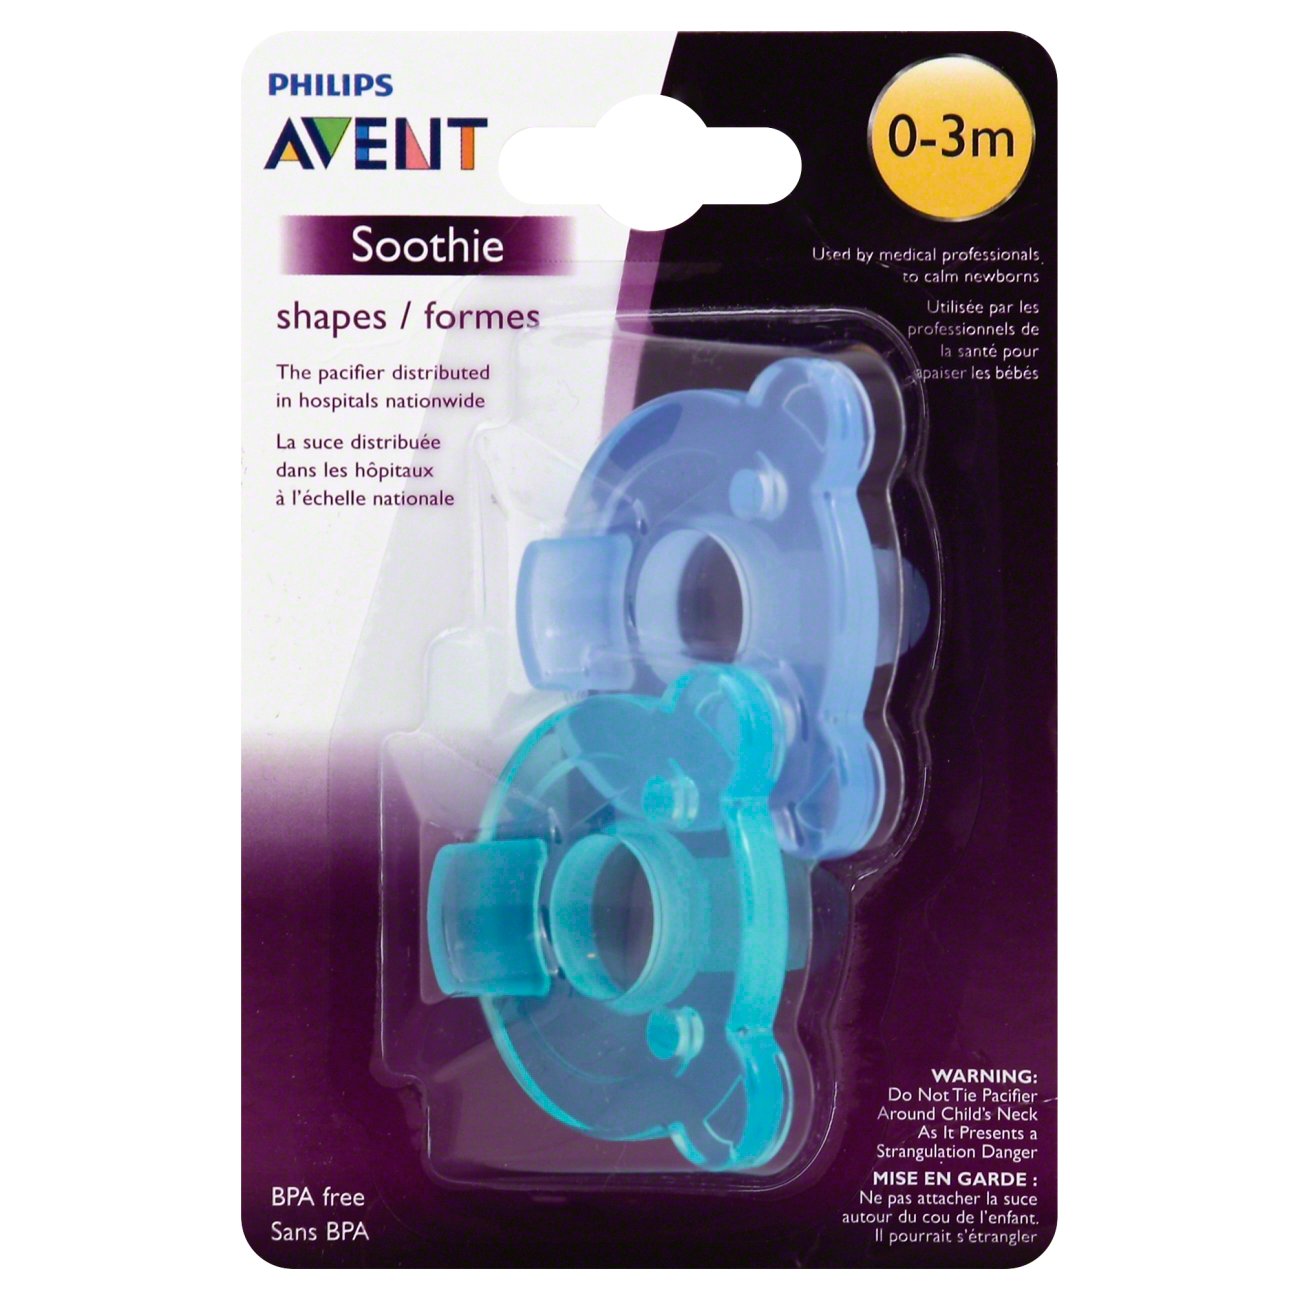 philips pacifier soothie